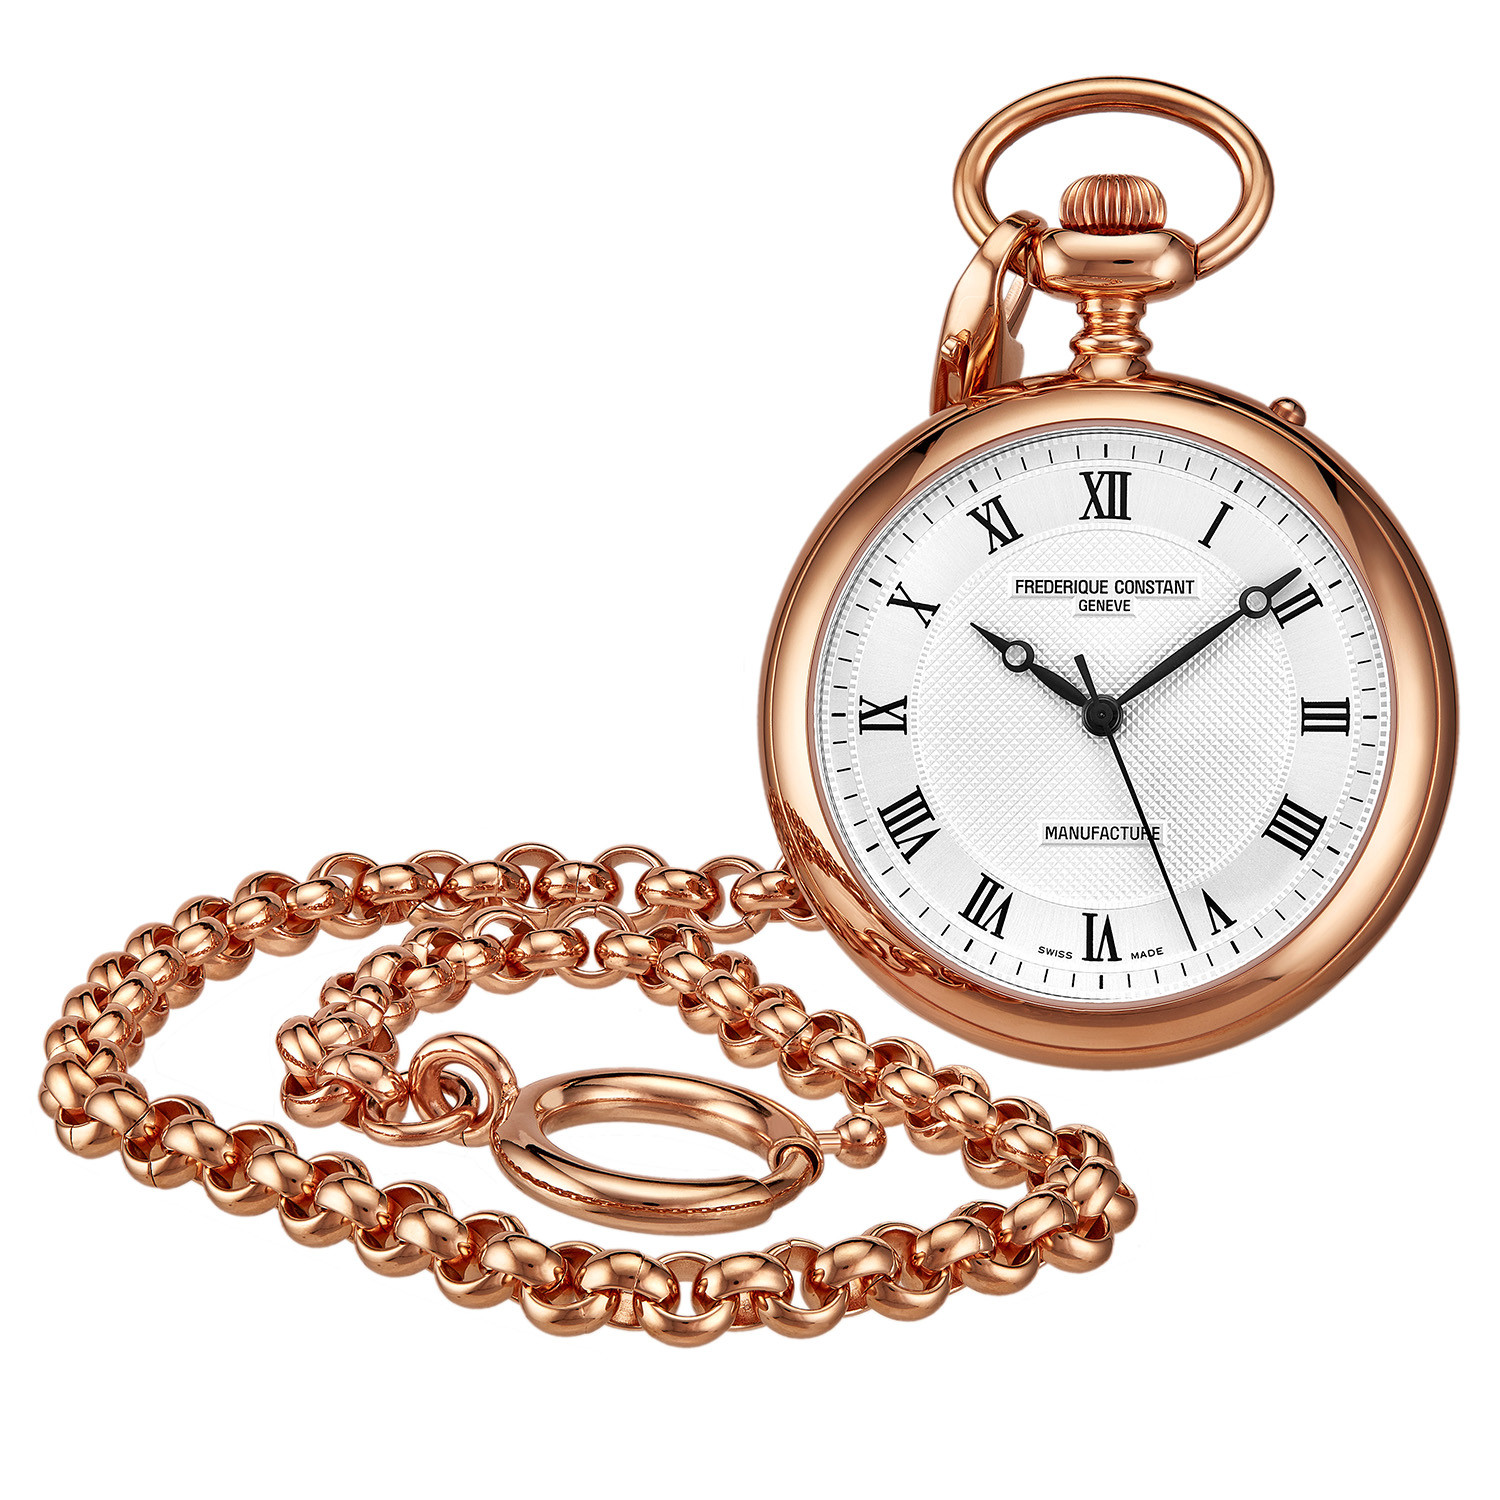 Frederique Constant Manufacture White Dial Rose Gold Pocket Watch FC-700MC6PW4